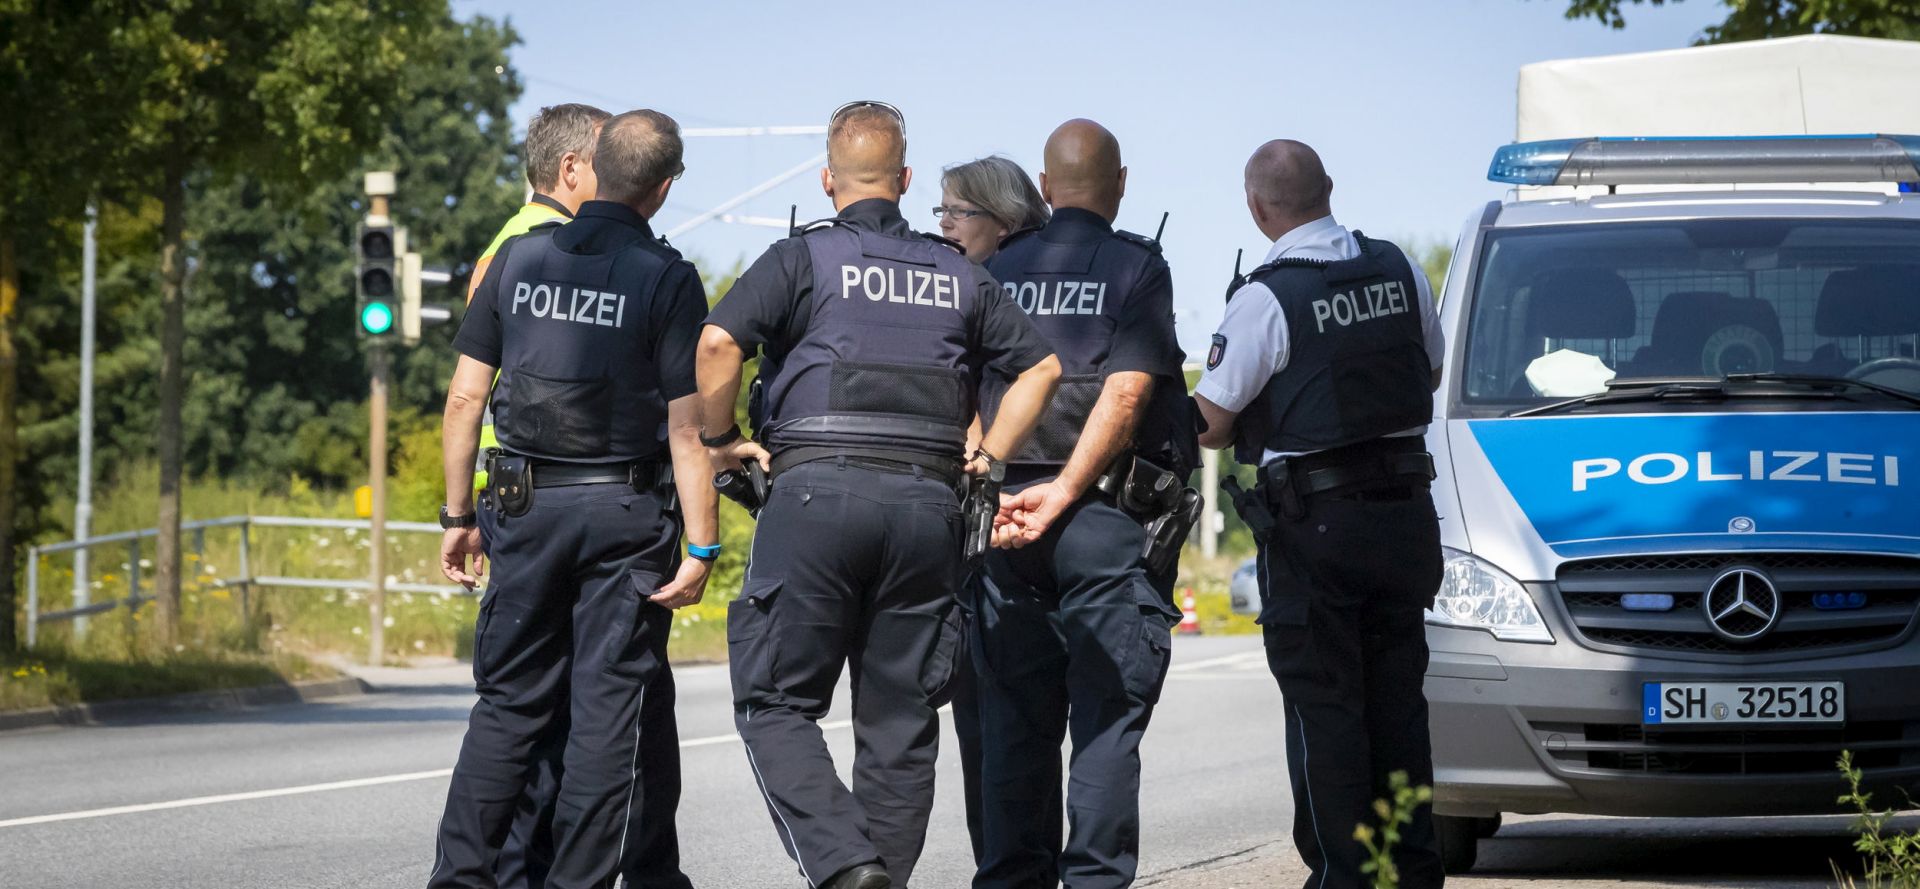 epa06900732 Policemen near the scene where a person had allegedly attacked passengers on a bus in Luebeck, Germany, 20 July 2018. According to police reports, several people were injured in a violent incident in a bus in Luebeck Kuecknitz. The perpetrator has been arrested, police said.  EPA/FELIX KOENIG